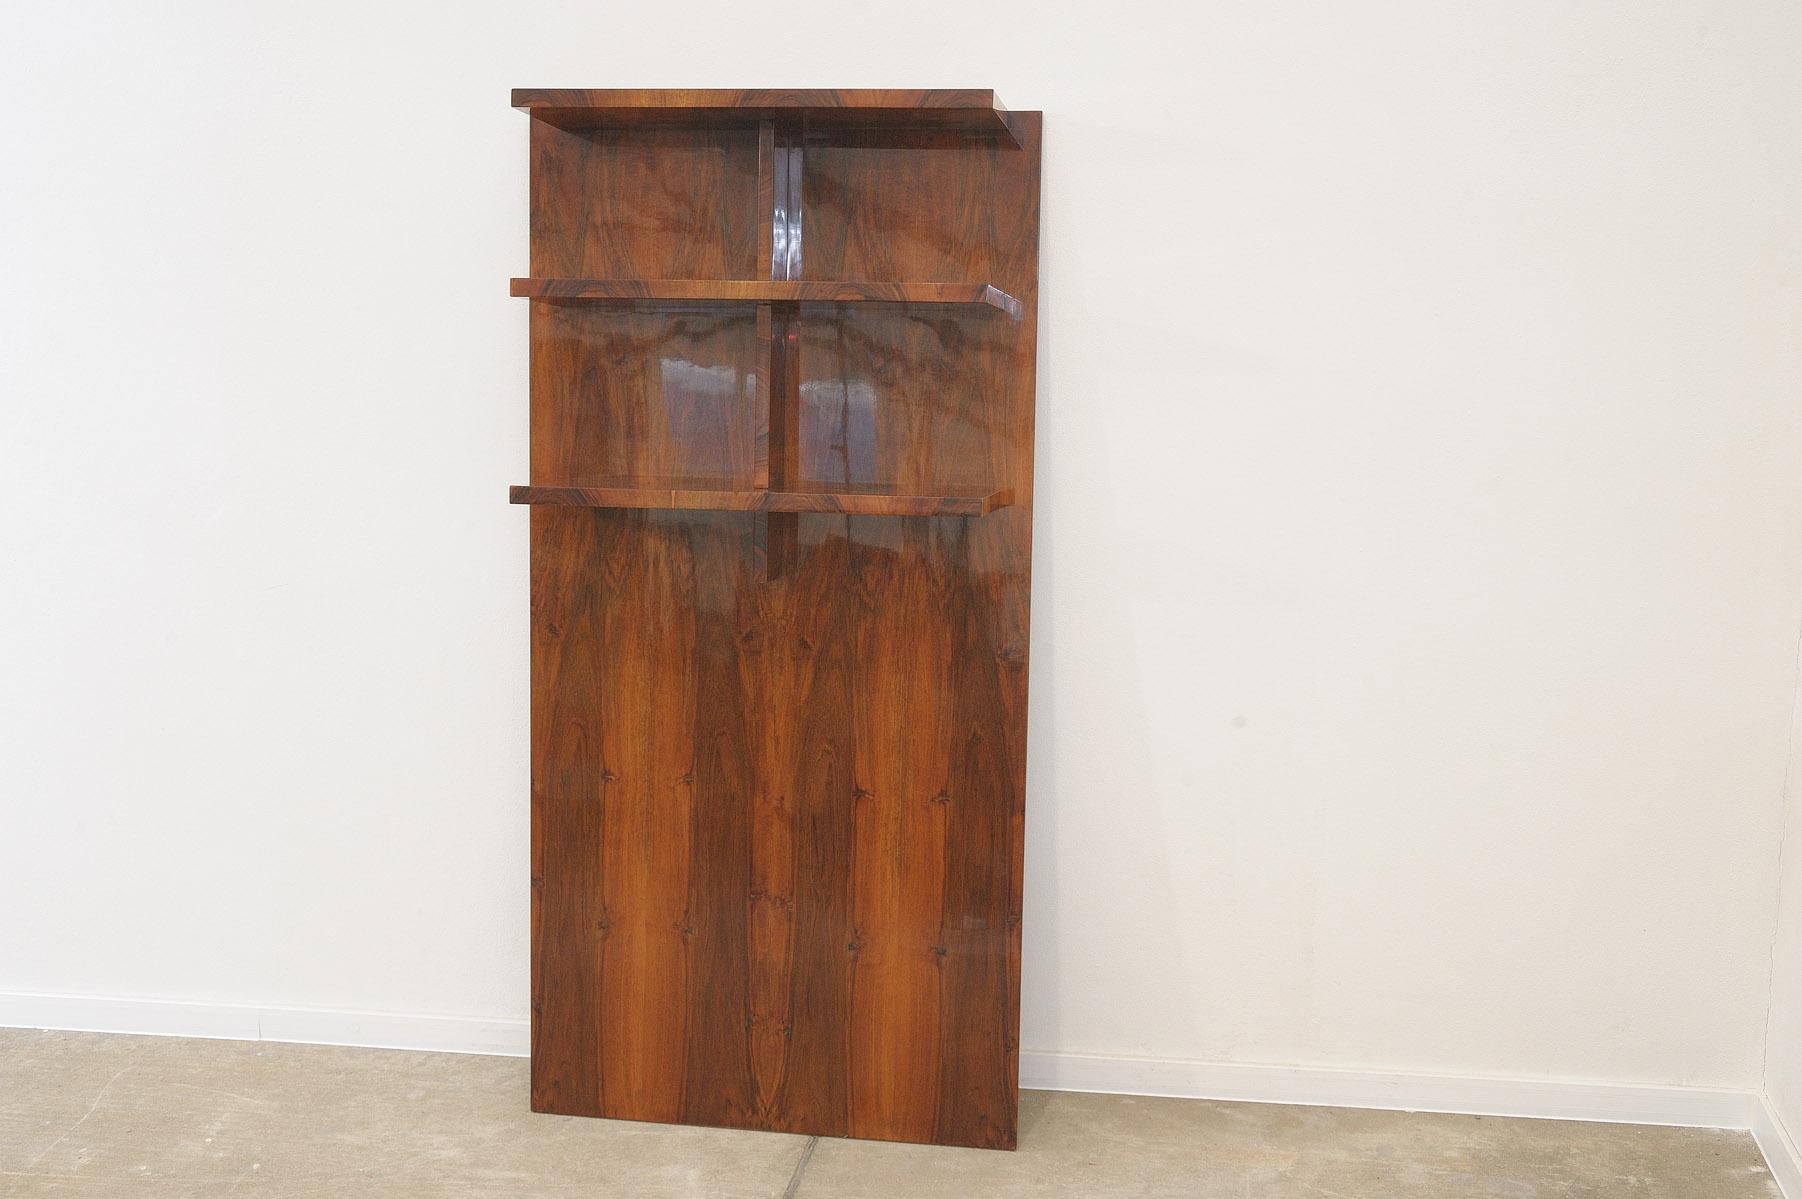 This  Wall shelf or bookcase was made in the former Czechoslovakia in the 1930s, It´s made of walnut, you hang it on the wall using two screws.

Dimensions of the shelves: 70x23x3cm between 1st and 2nd shelf is 27 cm, between 2nd and 3rd shelf is